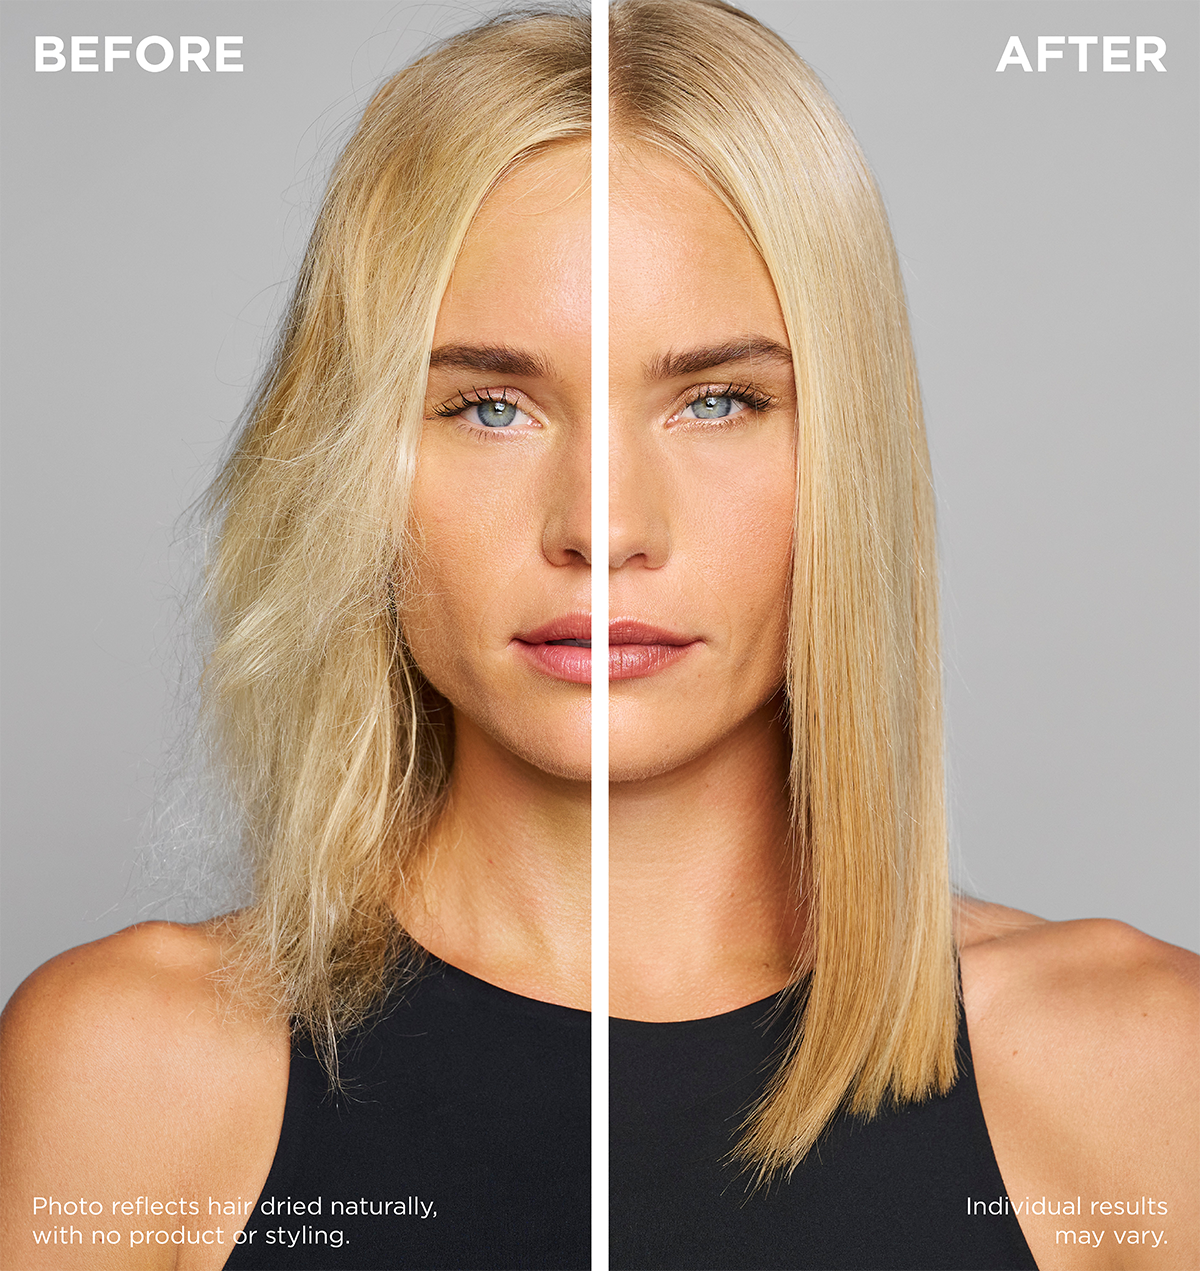 A before and after photo where the model's hair is notably healthier with less frizz and more shine in the after photo.